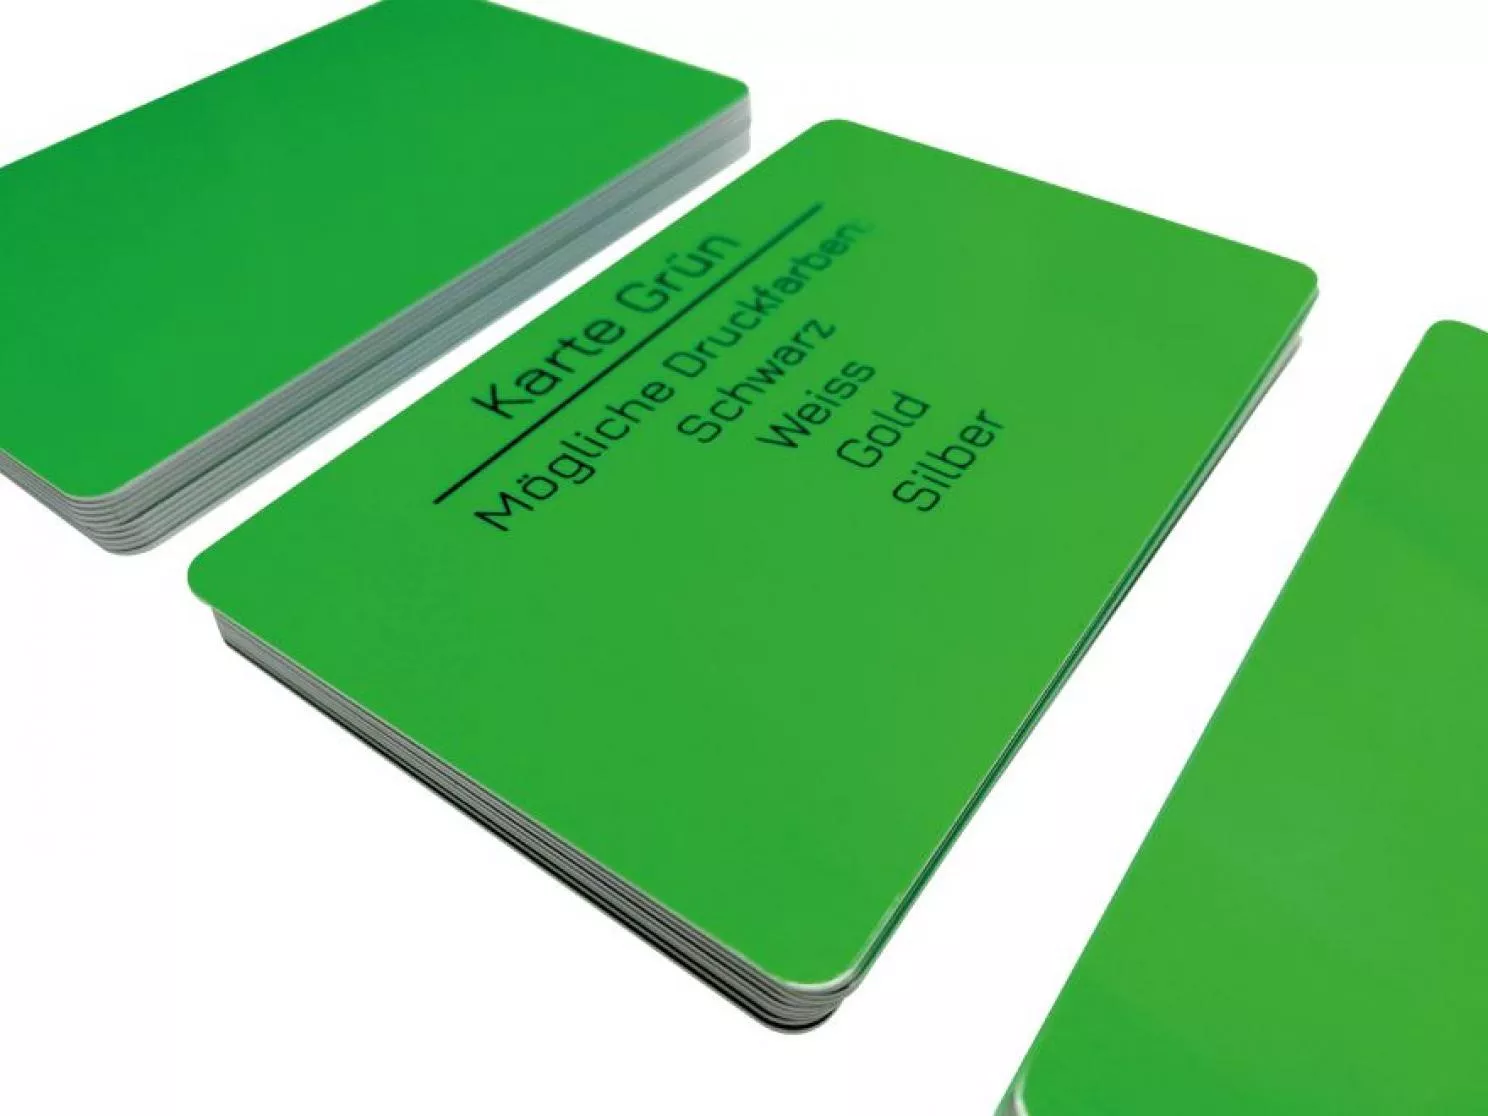 plastic card green with signature pane